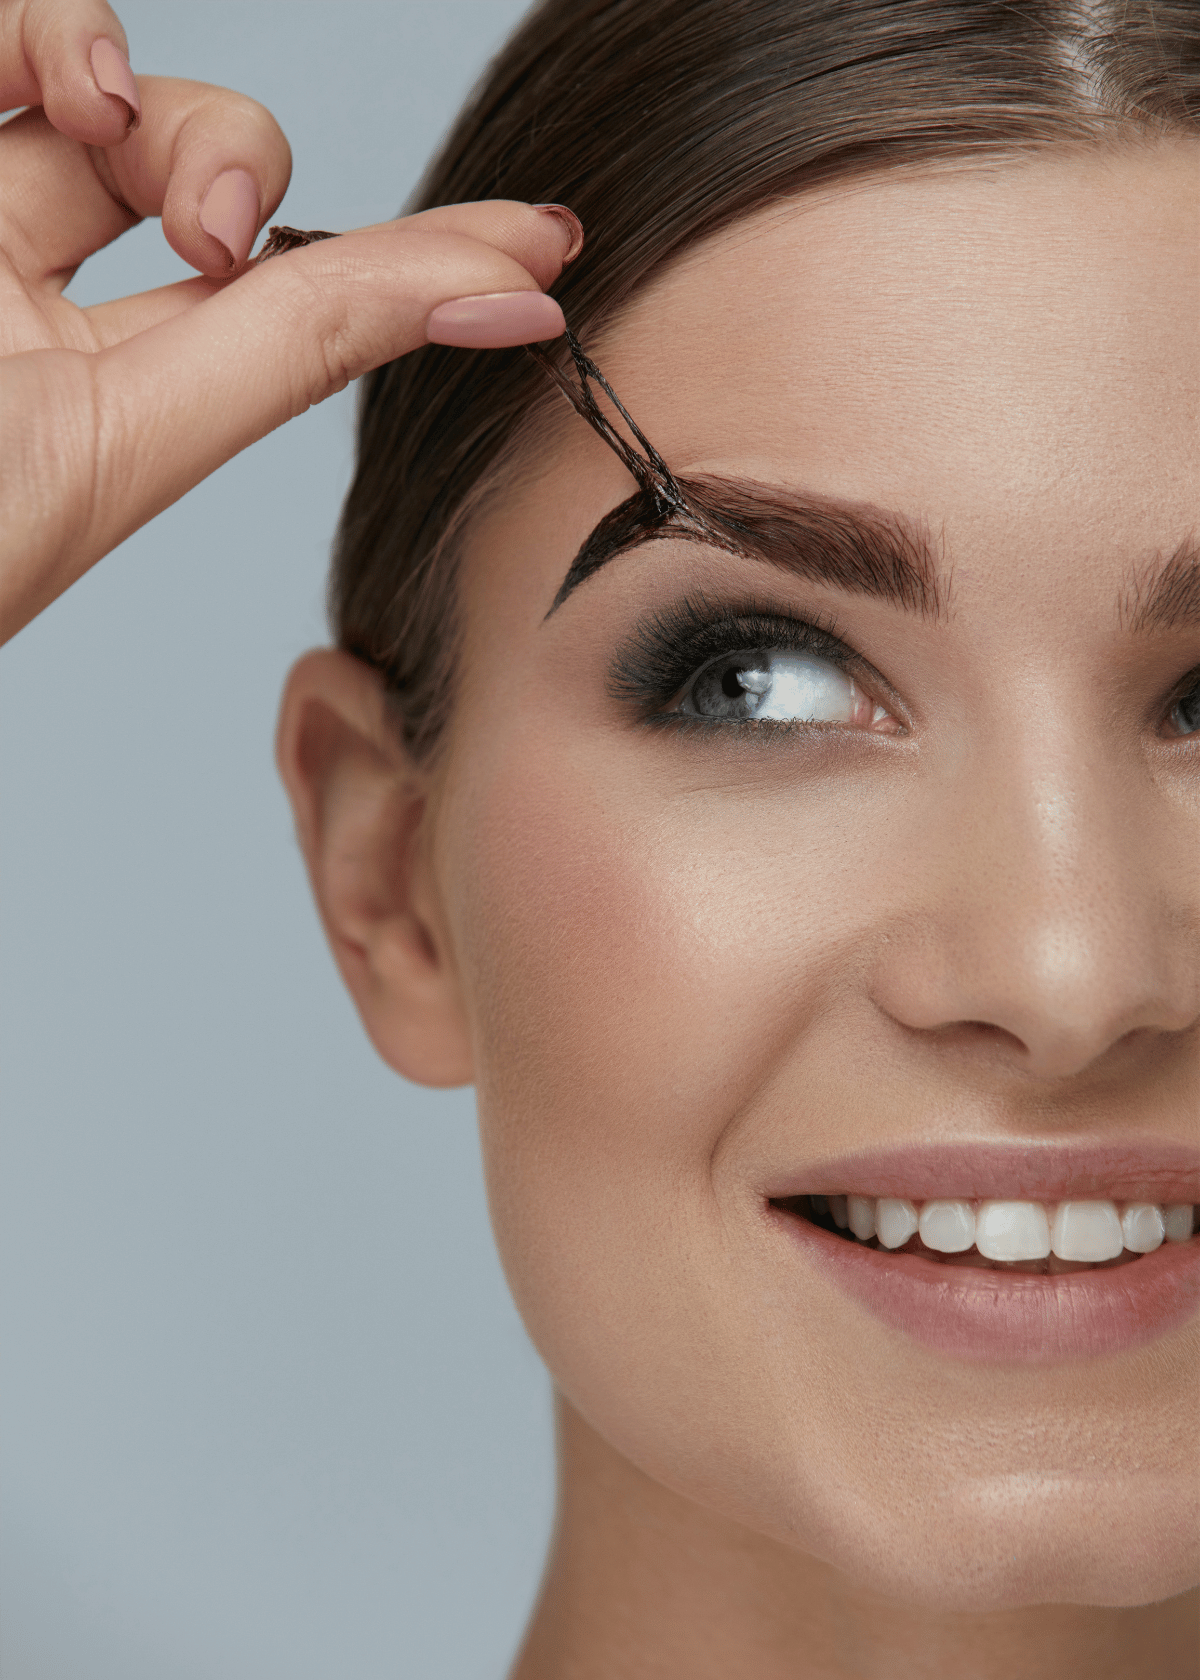 Top 3 Eyebrow Stamp Kit: Finding the Best Ones for Perfect Arches